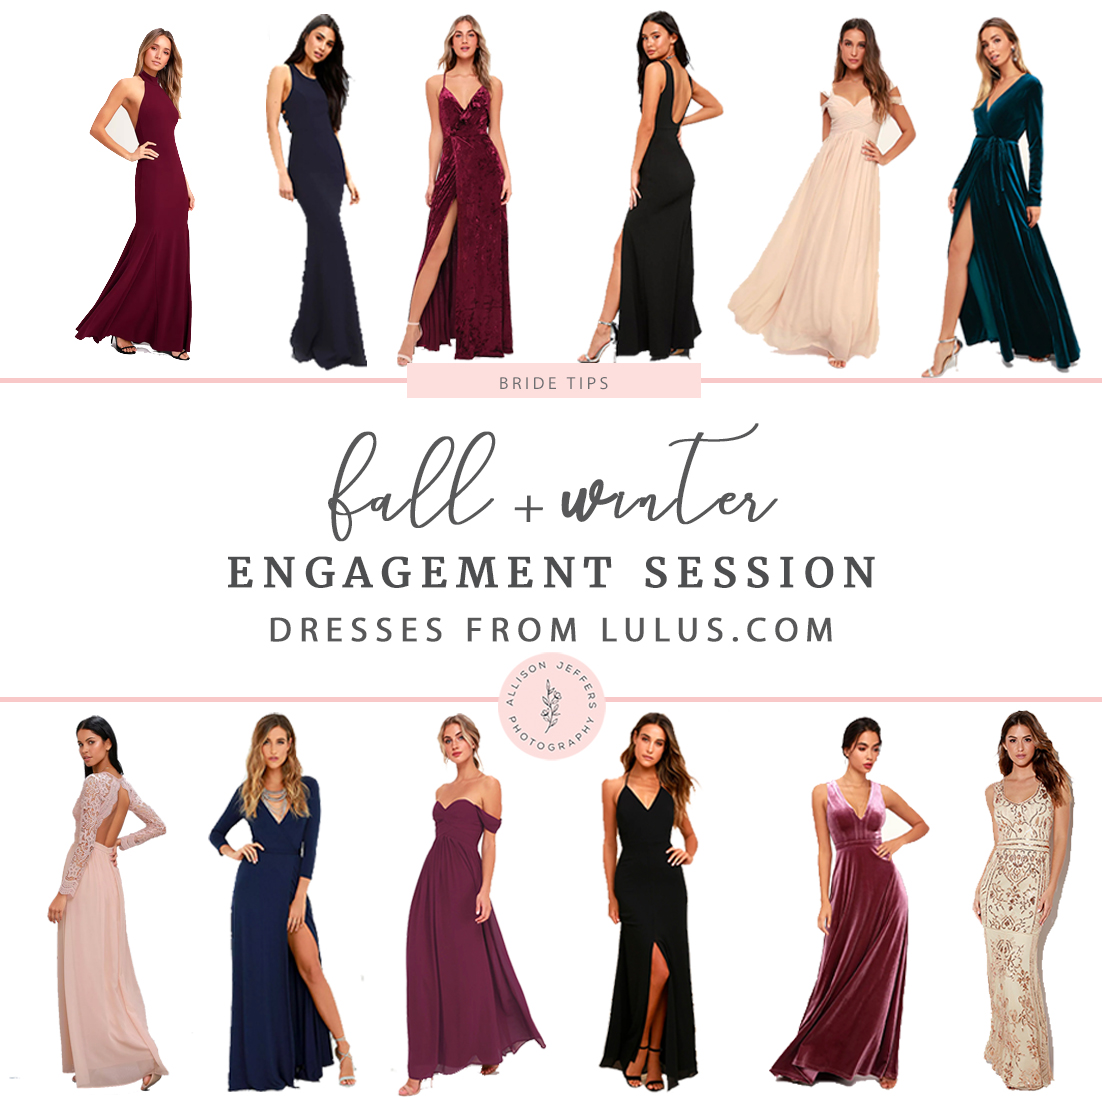 WHAT TO WEAR ENGAGEMENT SESSION